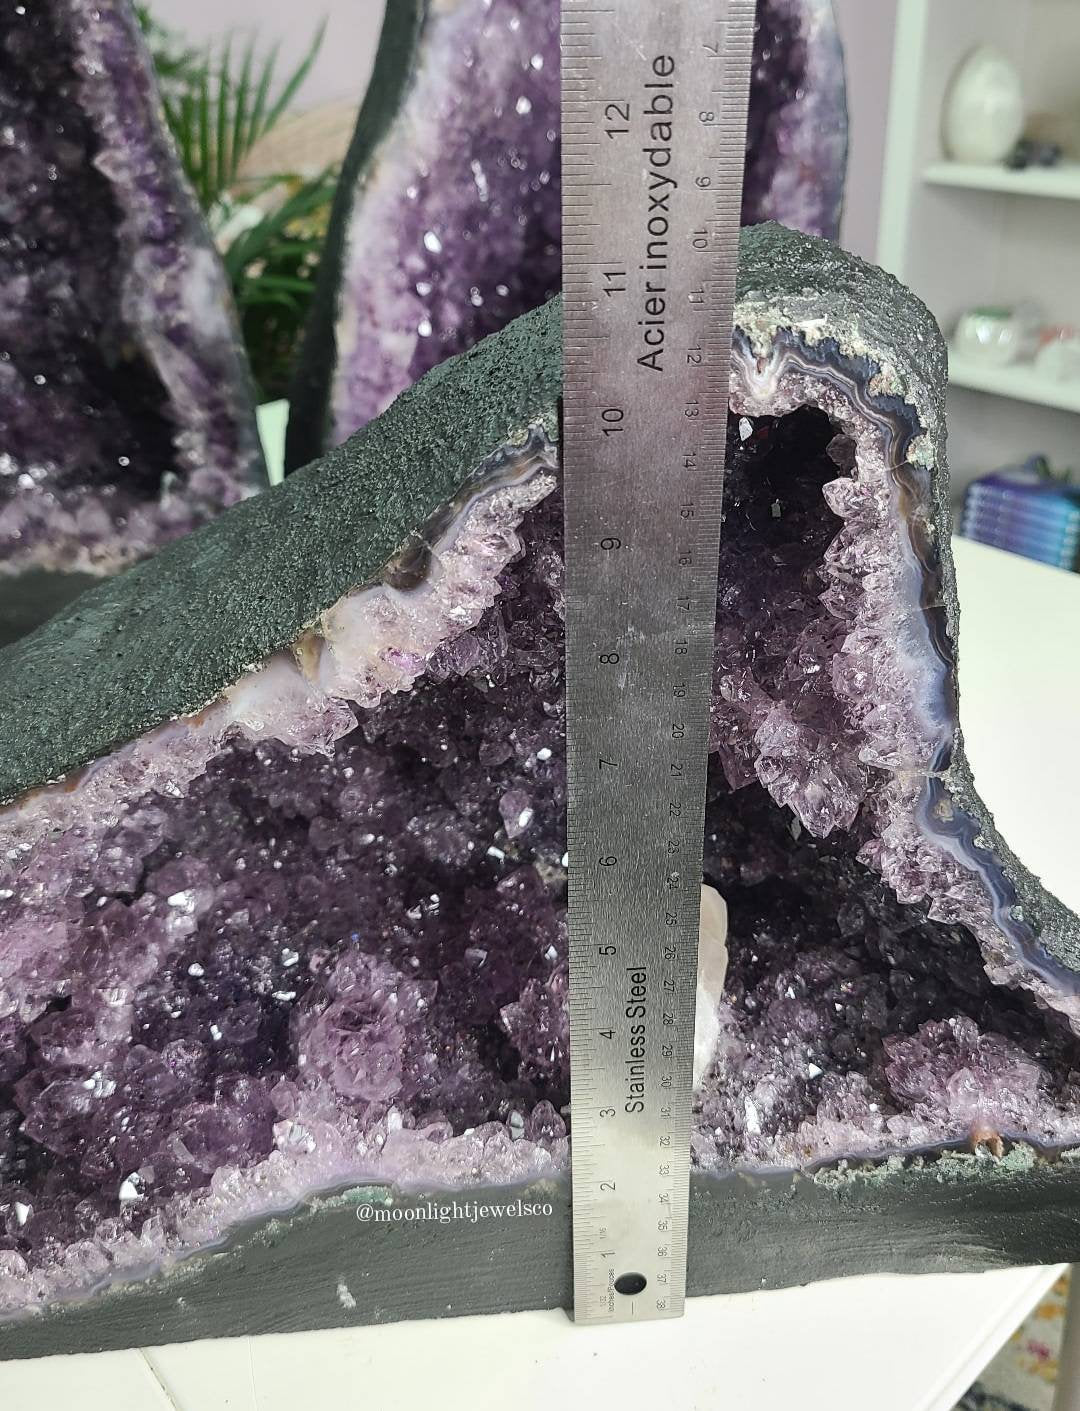 18.75 KG Amethyst Cathedral with Calcite Inclusion, Micro Druzy and Amethyst "Flowers" (see photo 3)